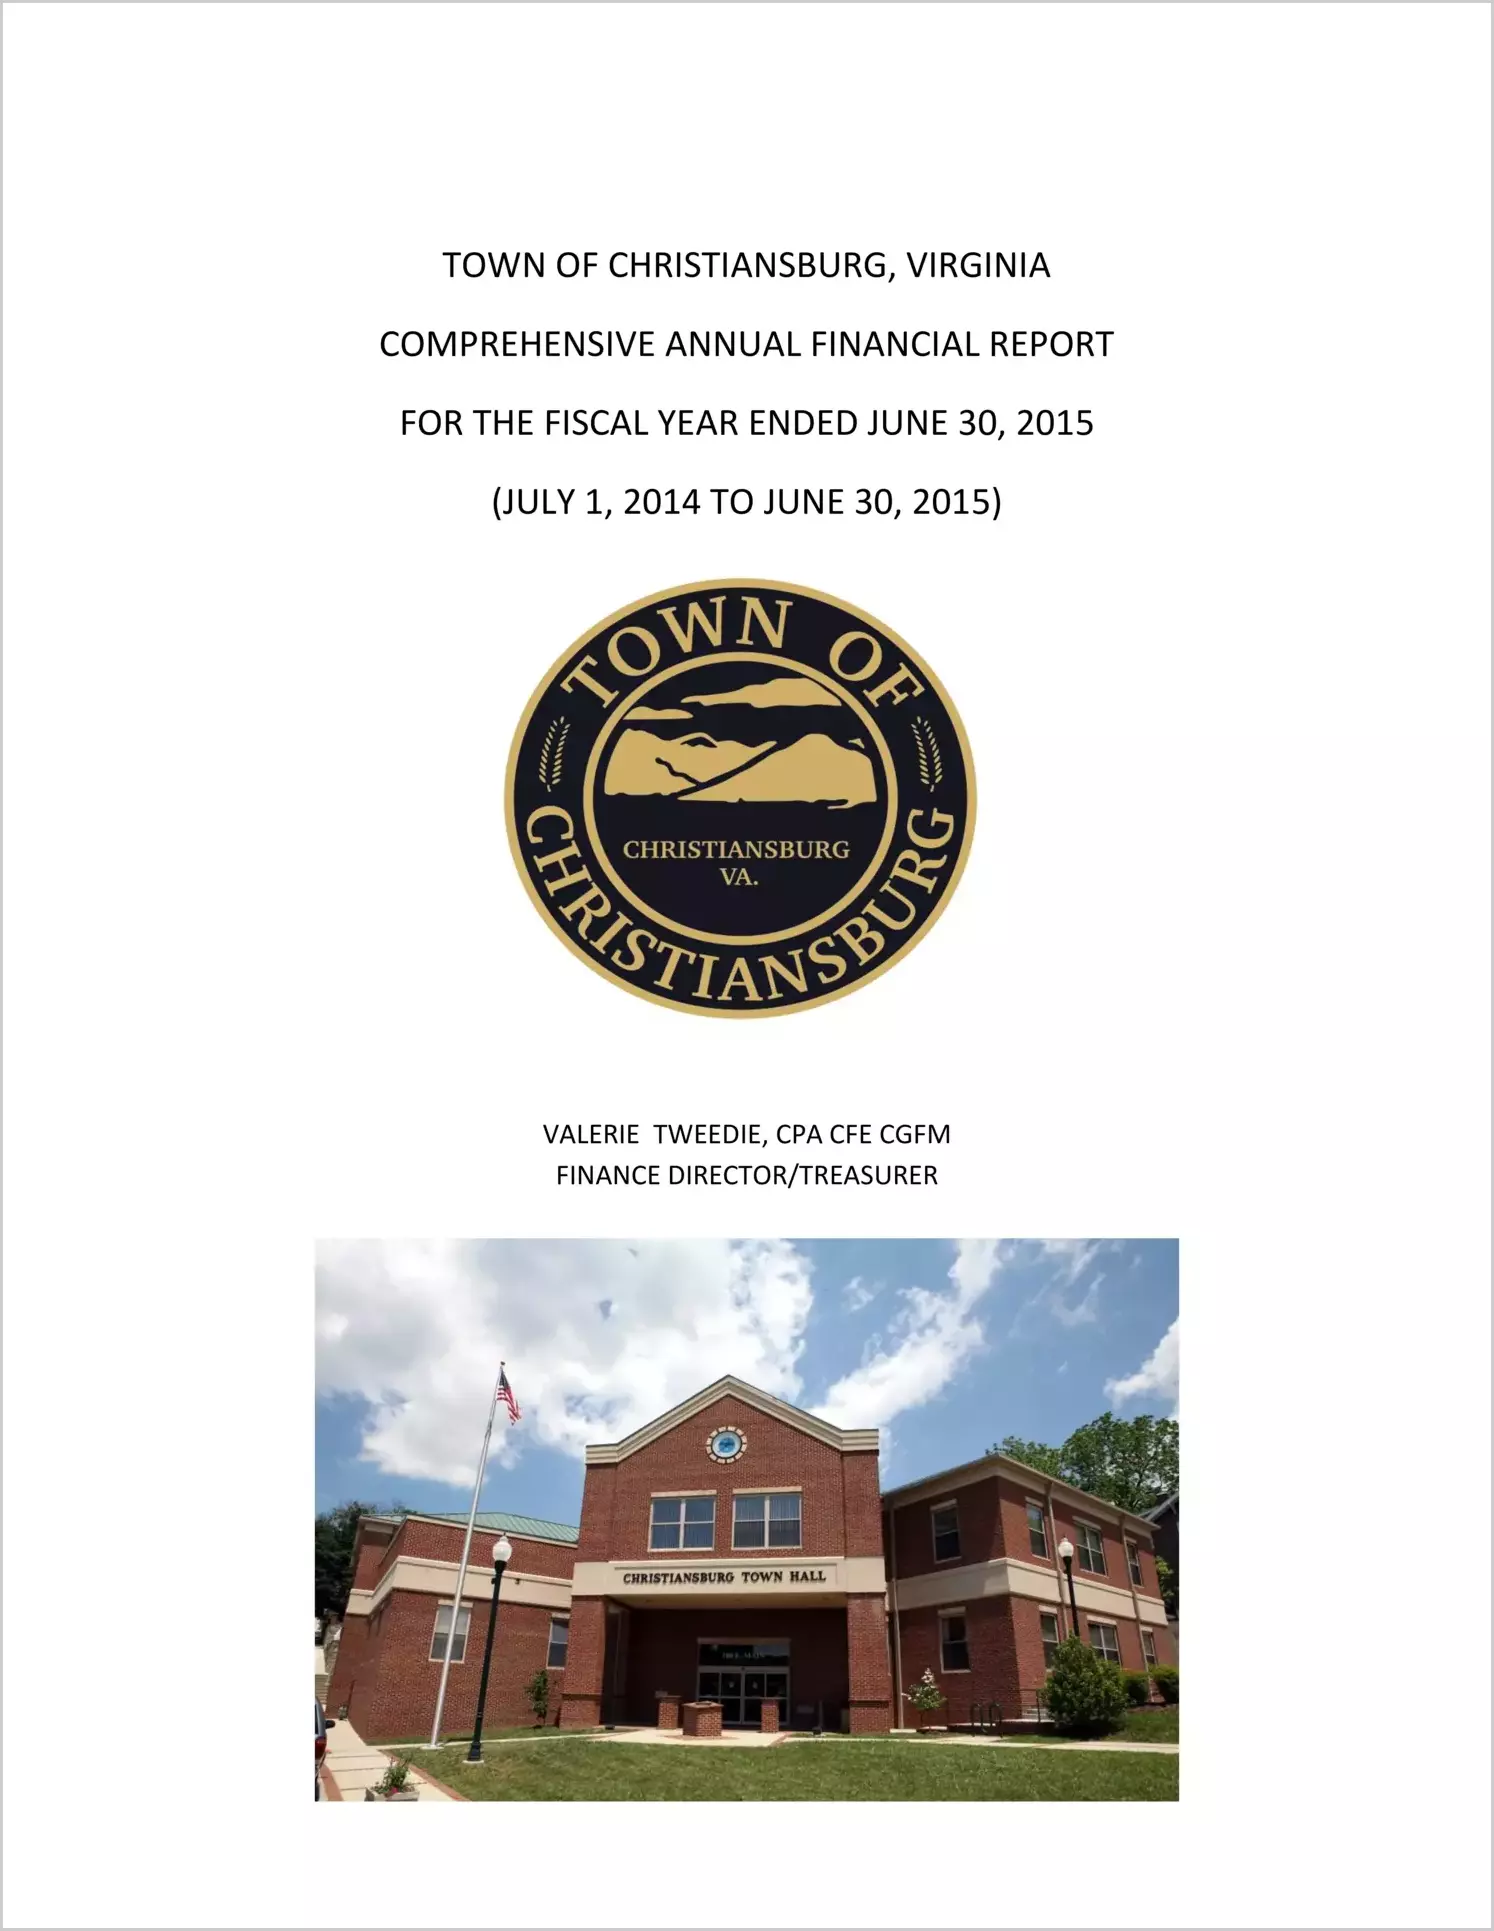 2015 Annual Financial Report for Town of Christiansburg